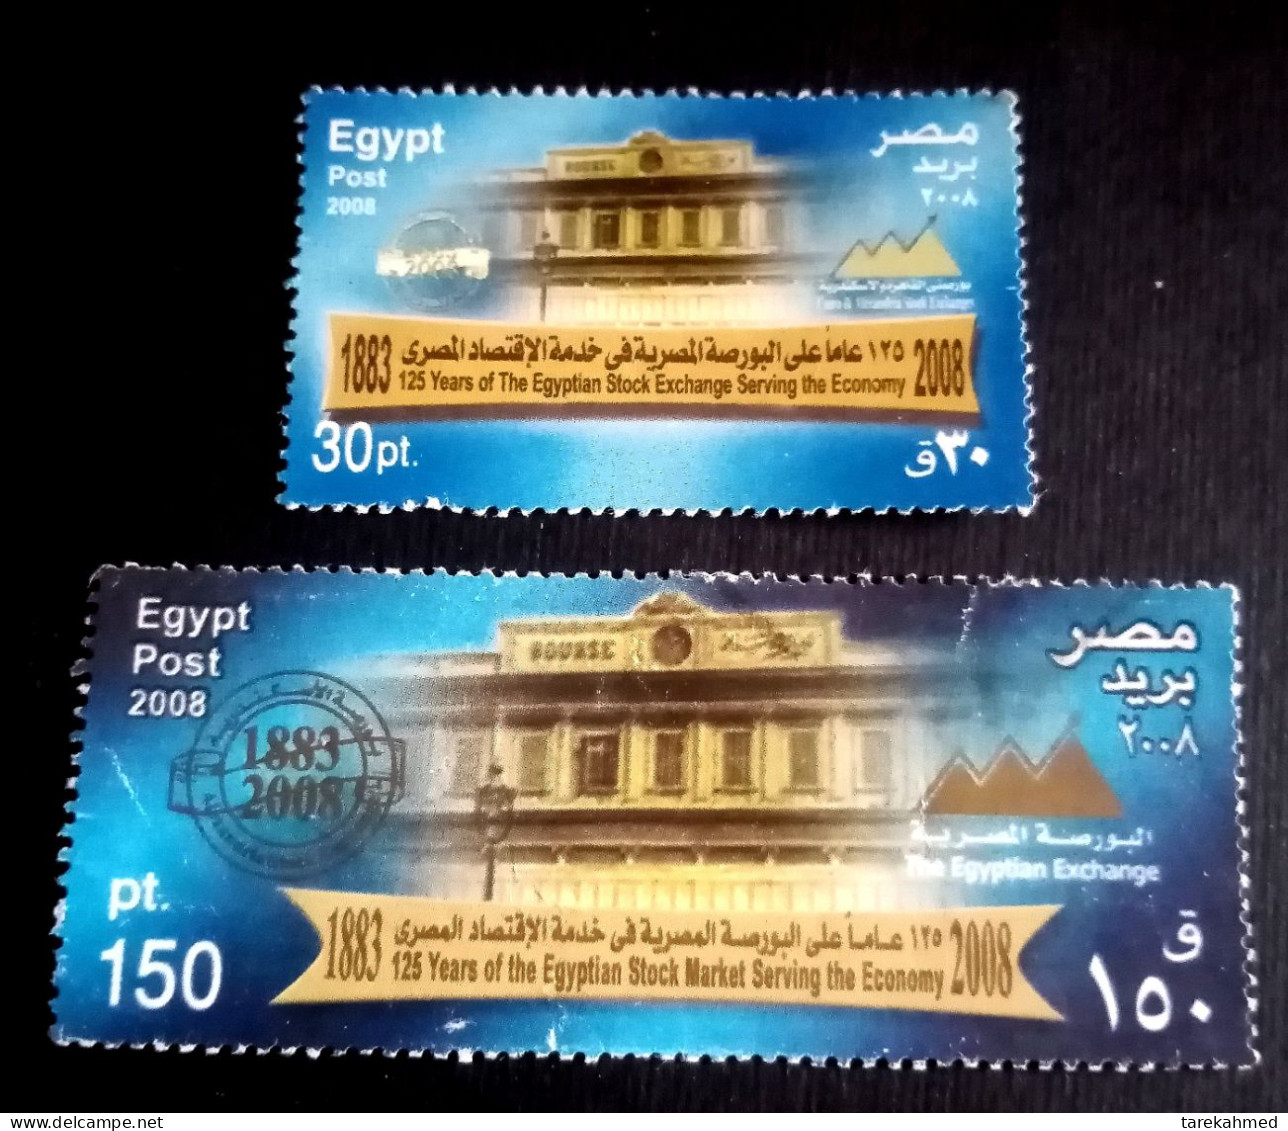 EGYPT. 2008 , Complete Used Set Of The 125th Anniv. OF EGYPTIAN STOCK EXCHANGE SERVING THE ECONOMY , VF - Used Stamps